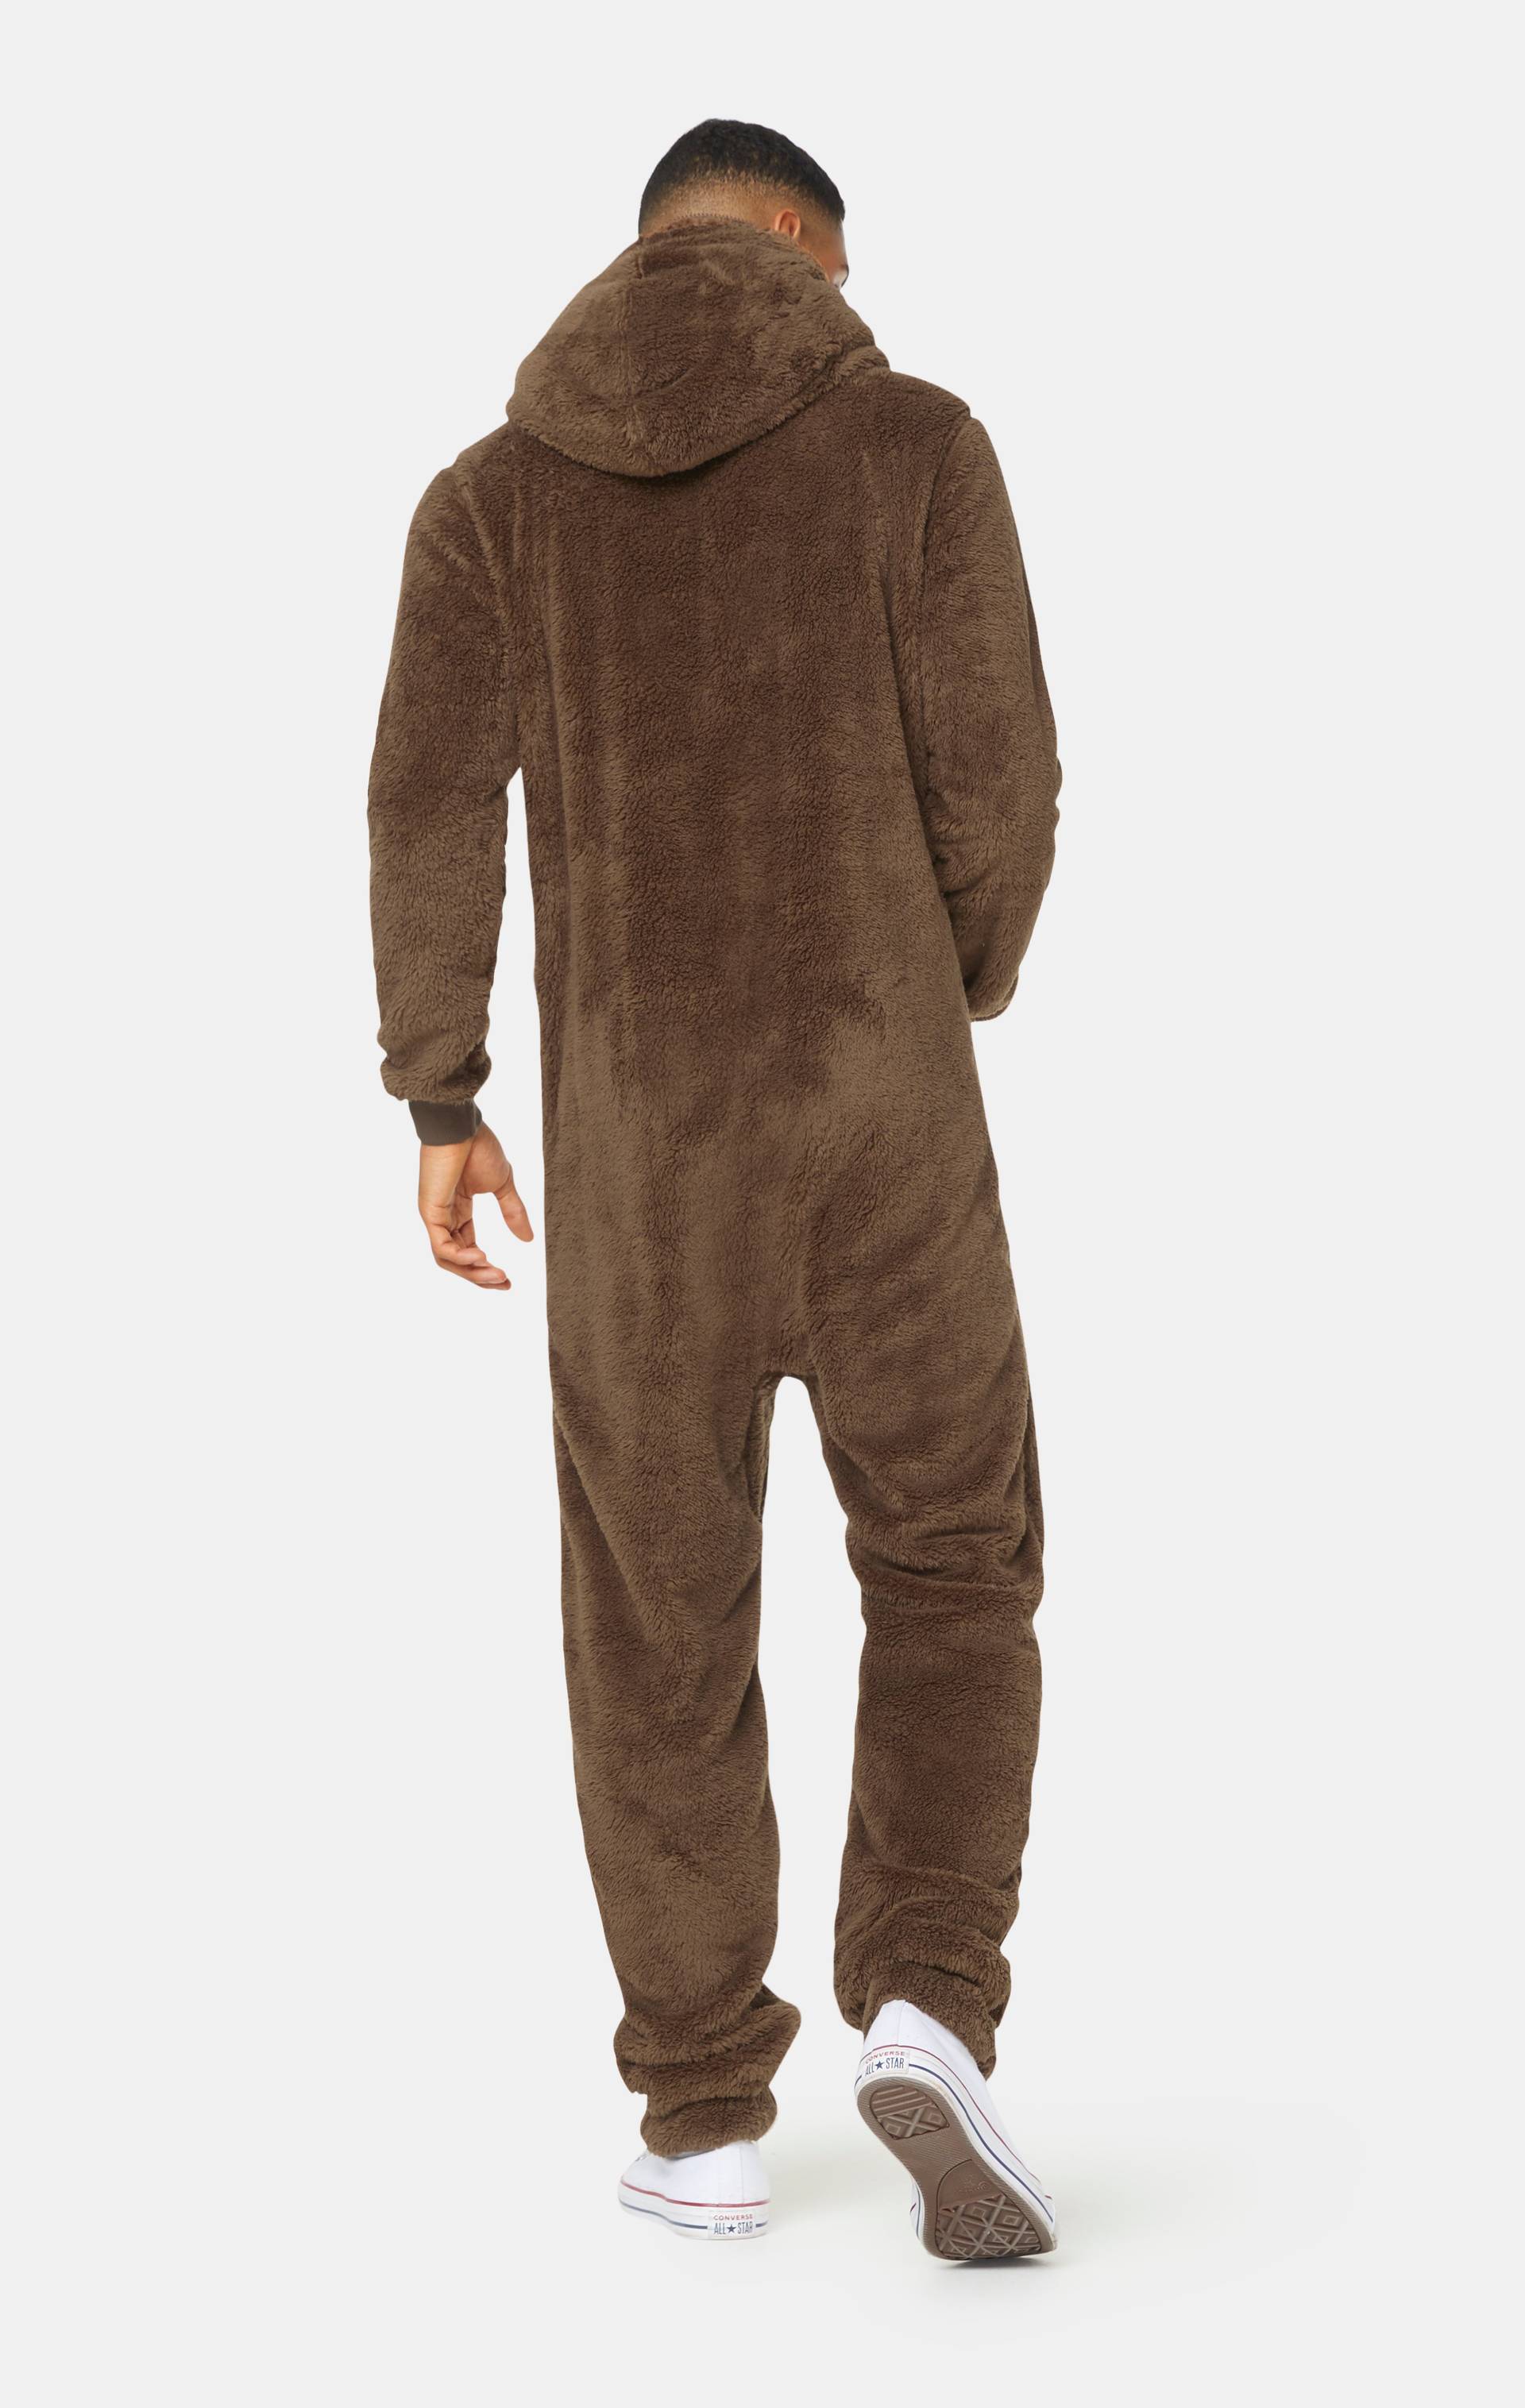 Onepiece The Puppy Jumpsuit Brown - 3